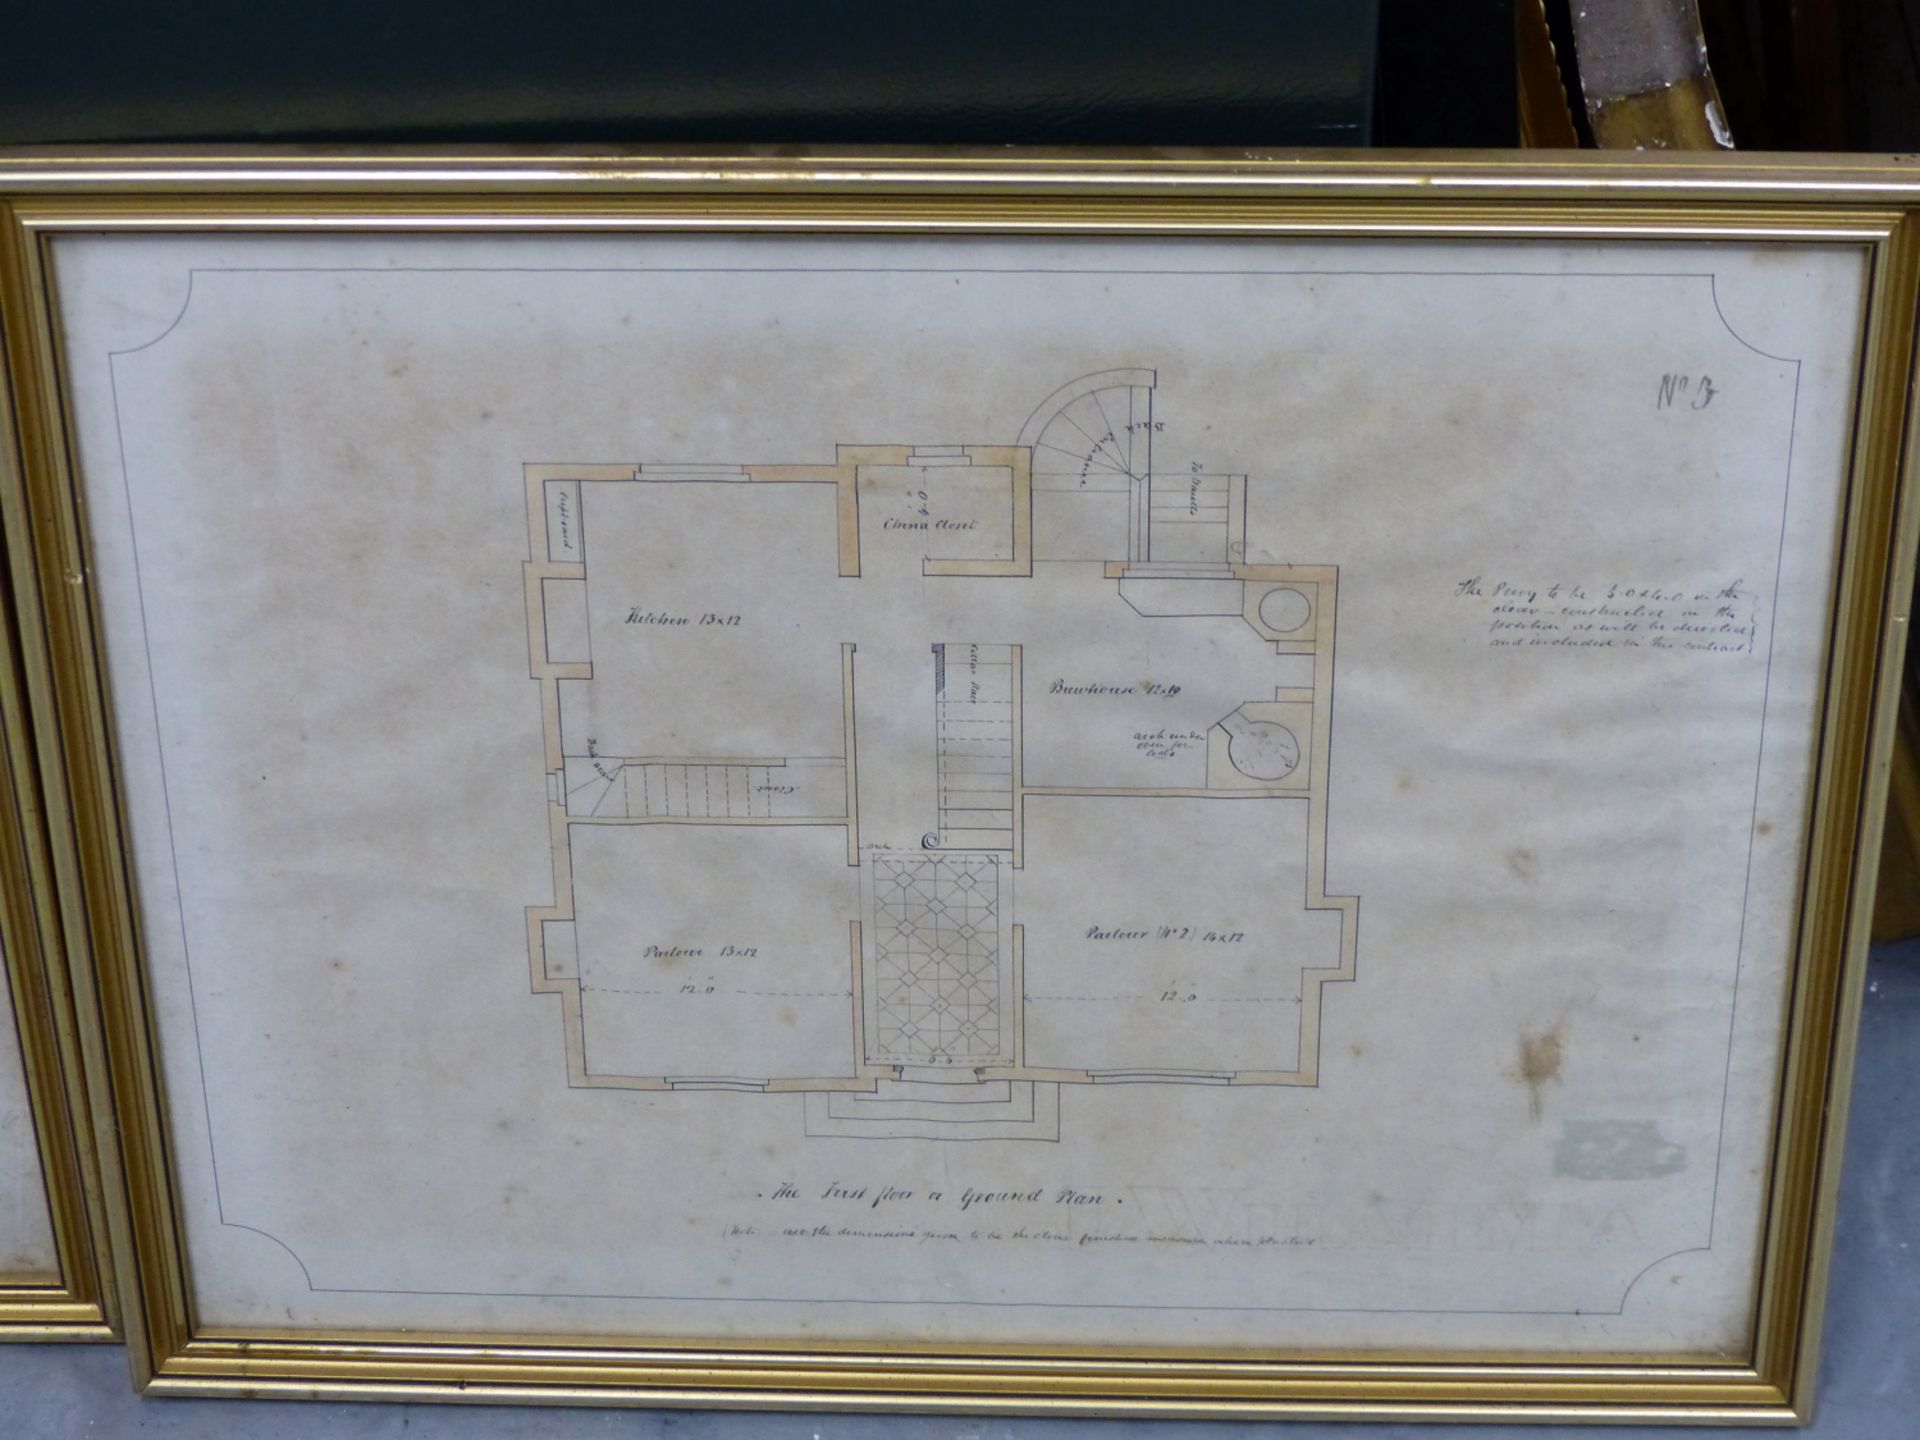 ARCHITECTURAL PLANS, AN INTERESTING SET OF MID 19TH CENTURY ARCHITECTS PLANS FOR AN IMPRESSIVE - Image 4 of 7